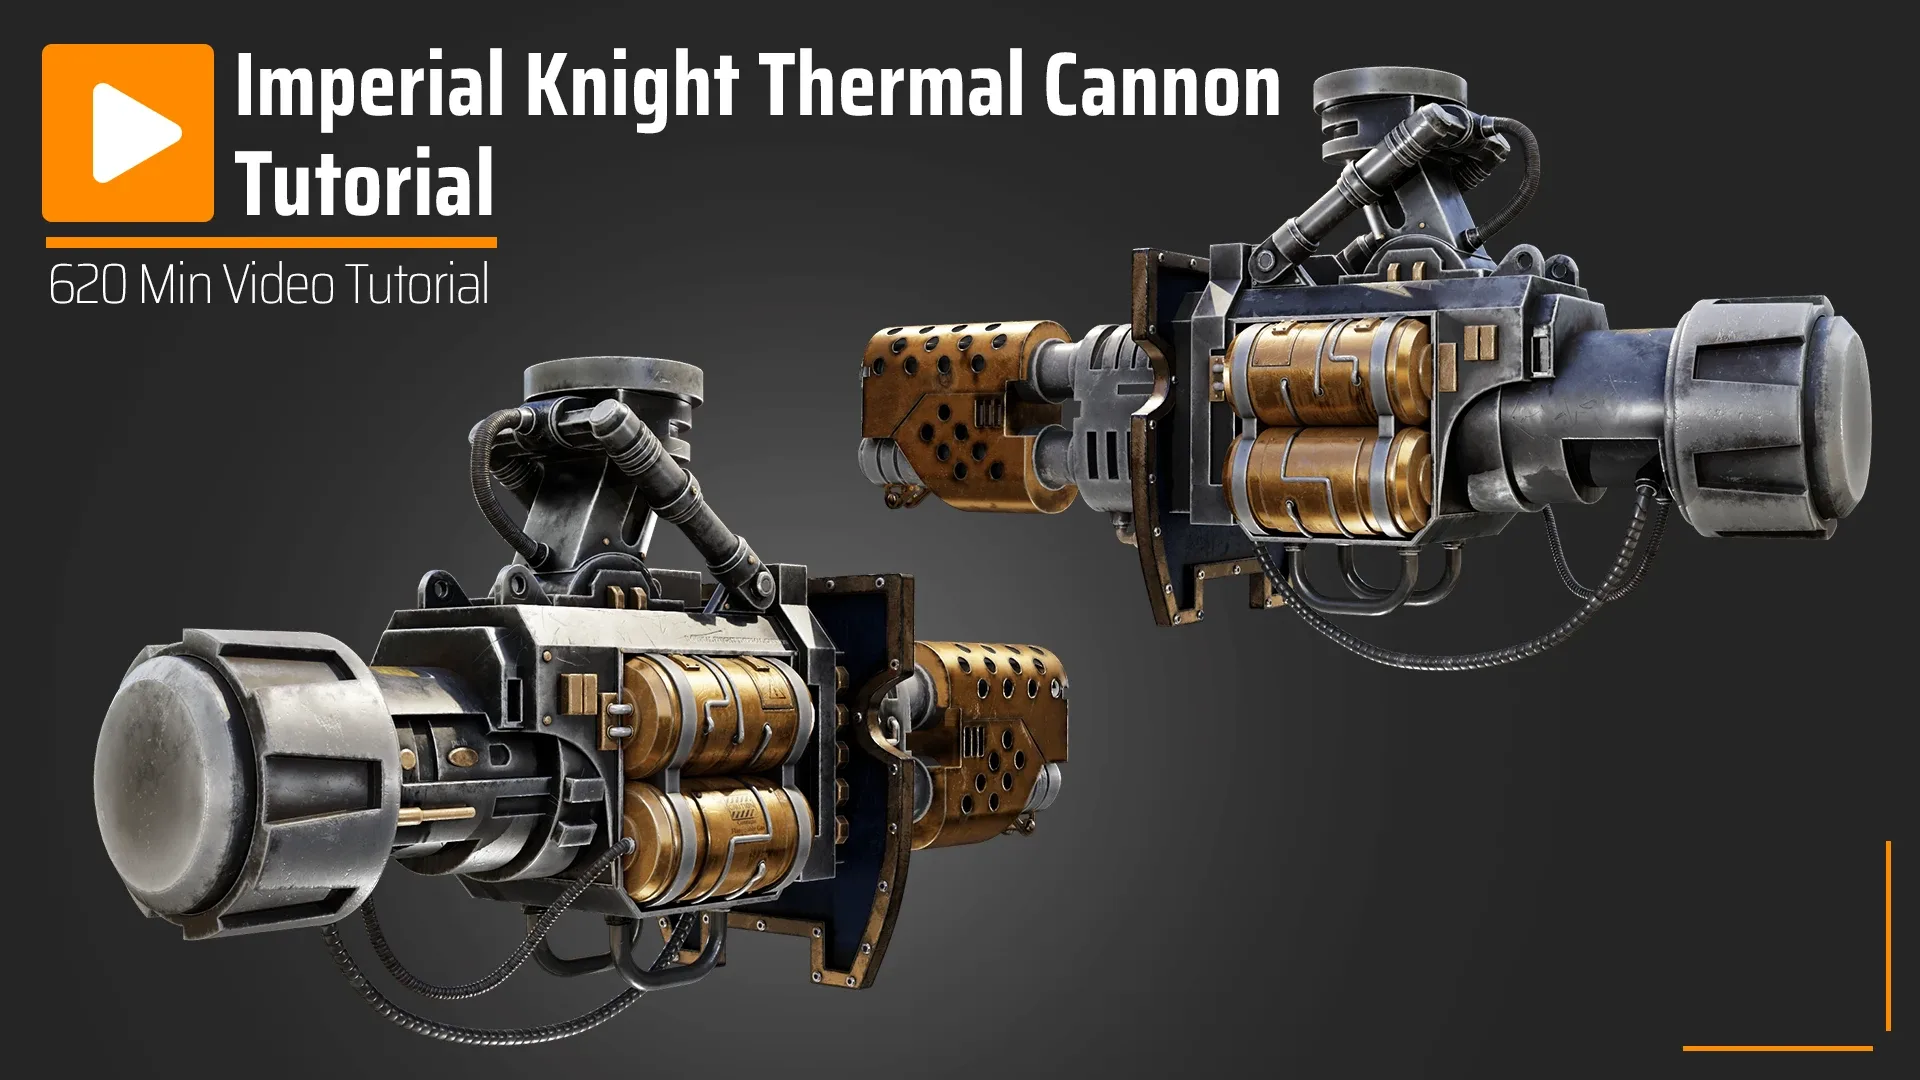 Thermal Cannon